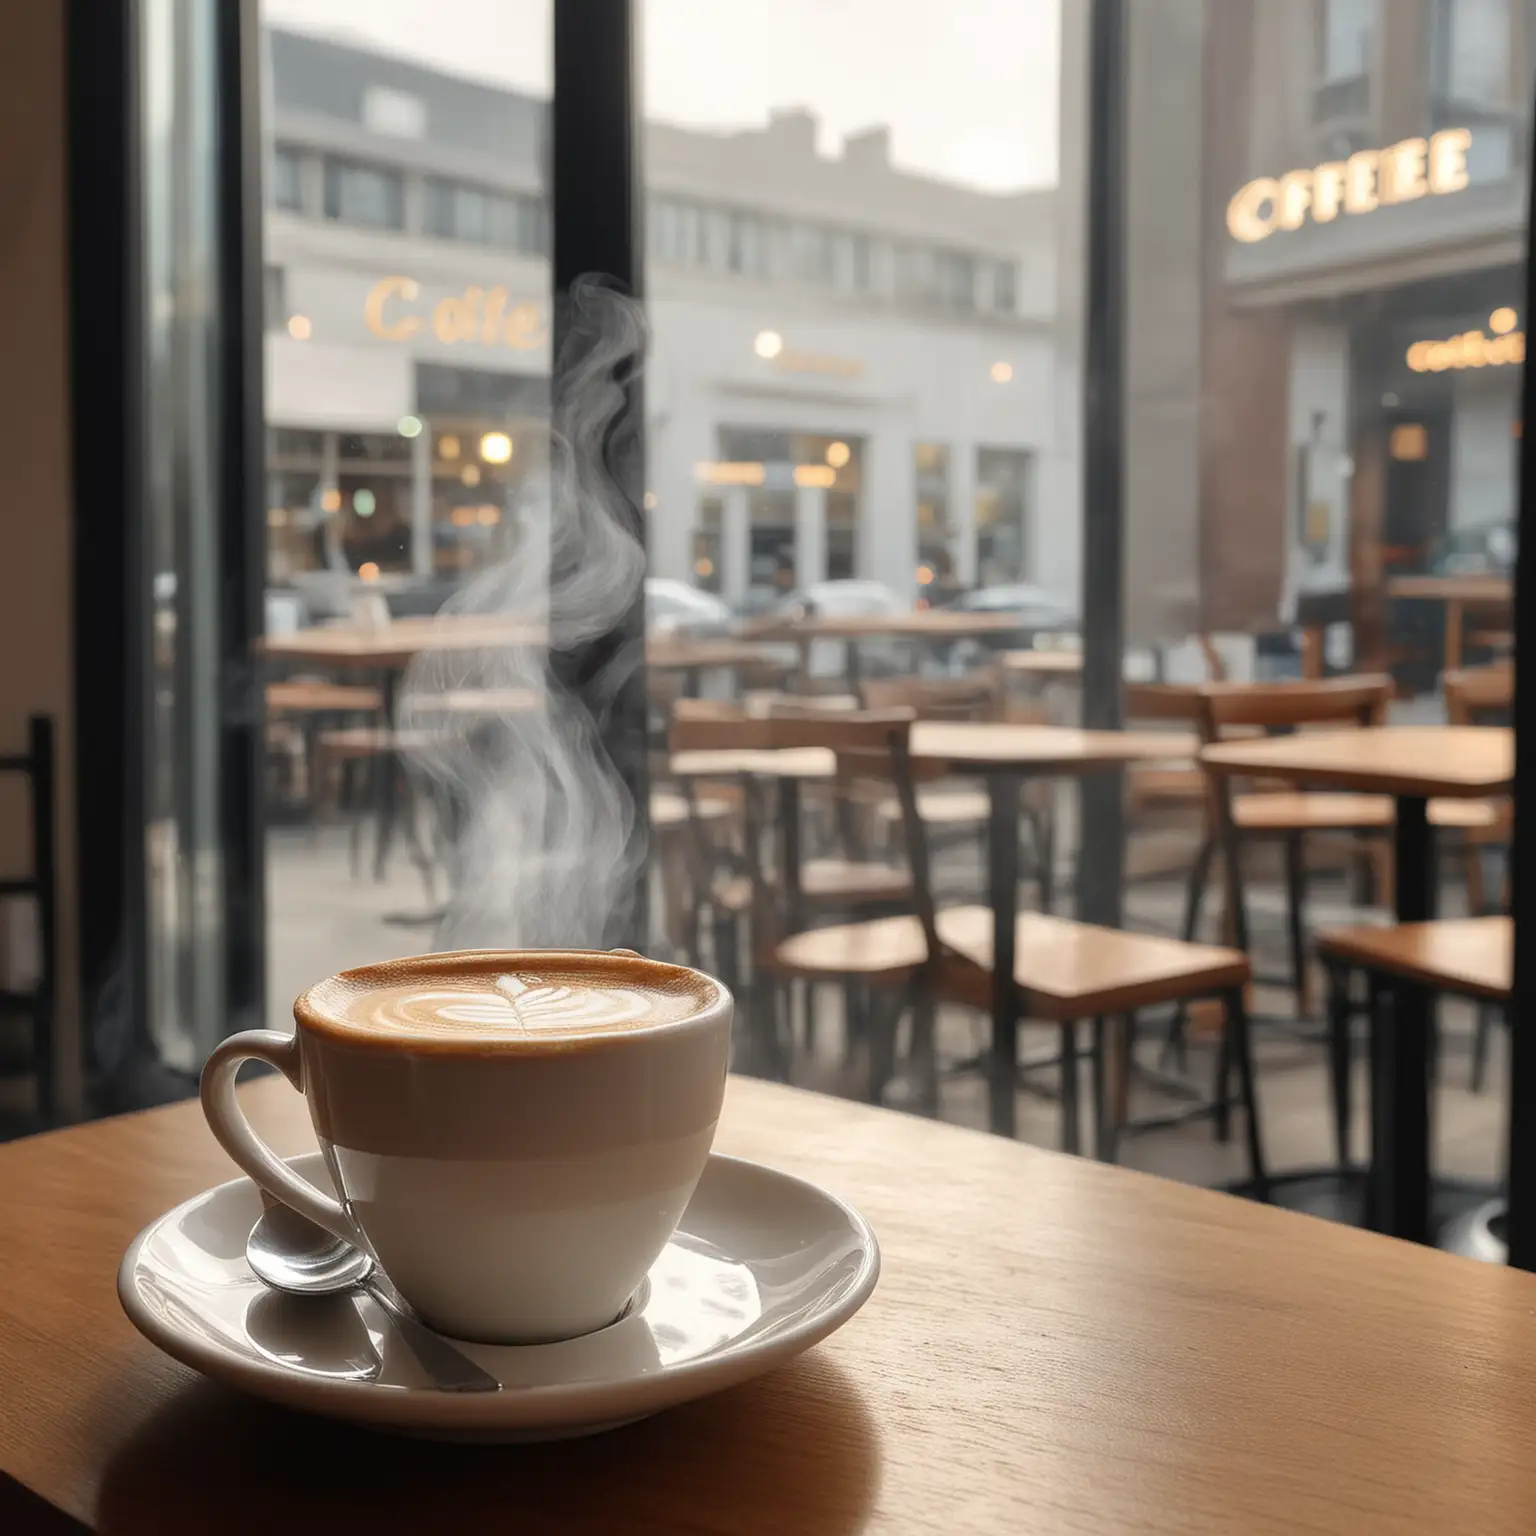 Show me a very nice and steaming cup of coffee with a very nice and modern coffee shop on the background